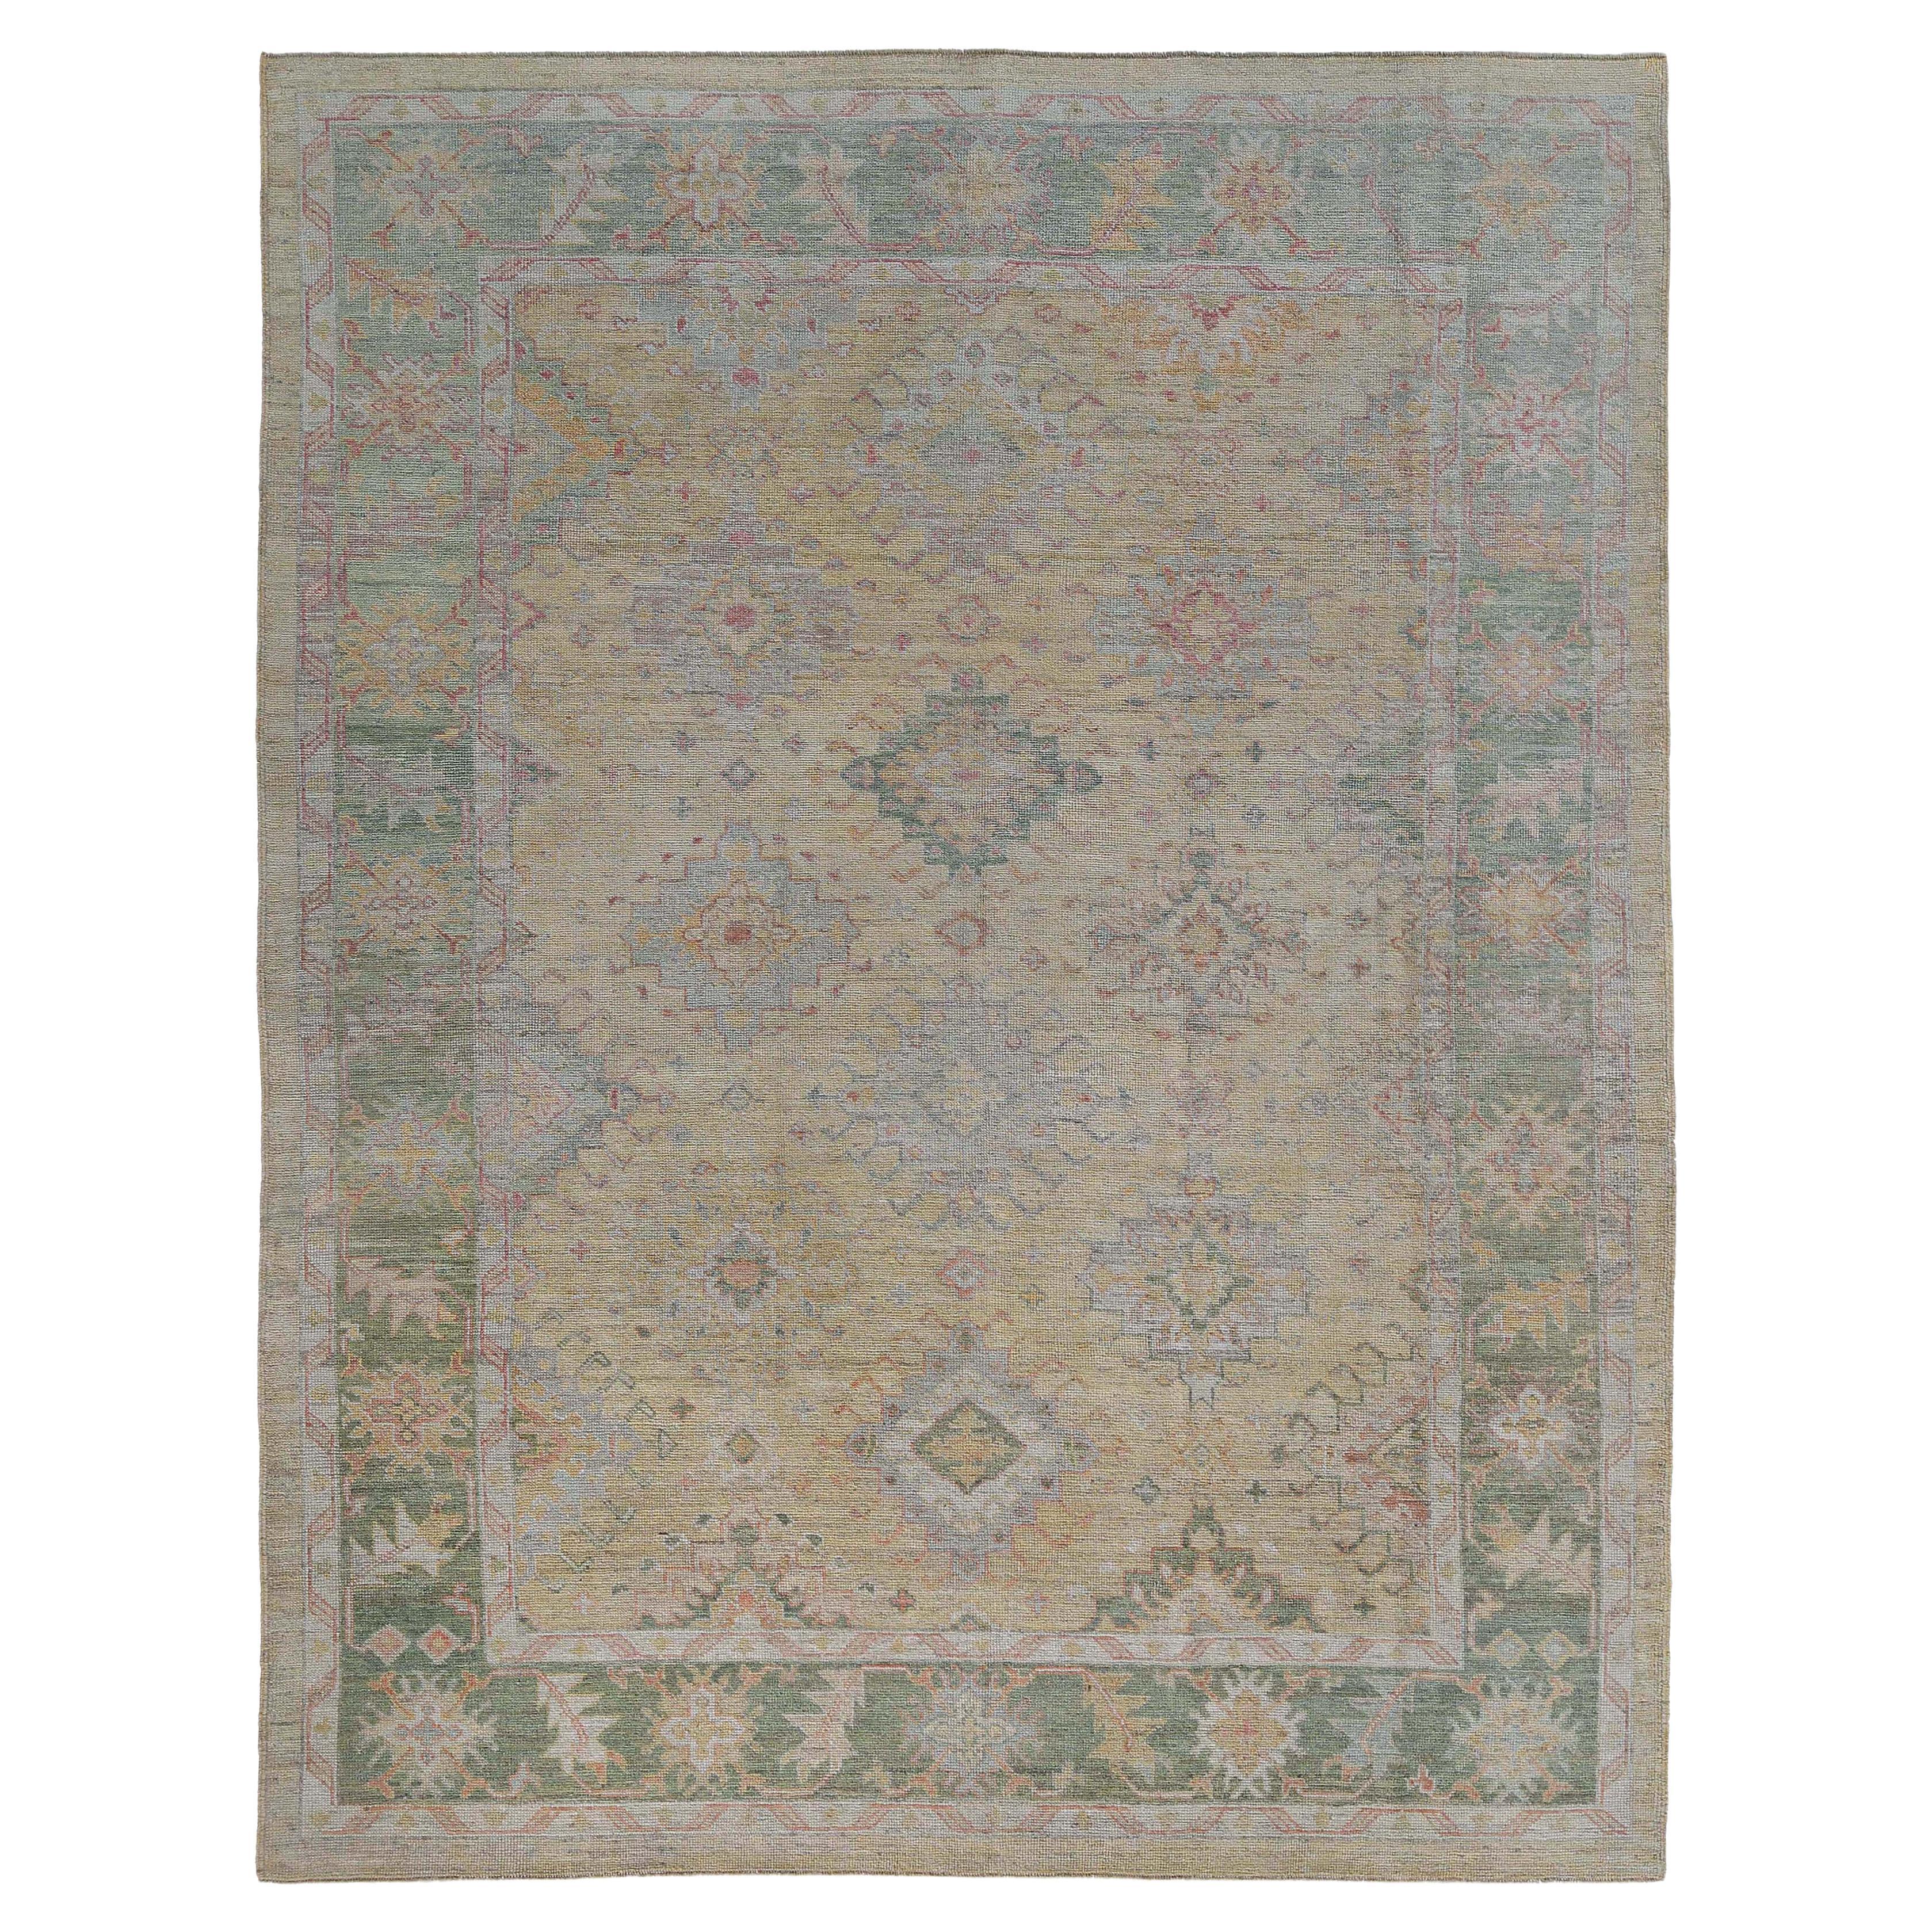 Turkish Oushak Rug with Light Tones For Sale